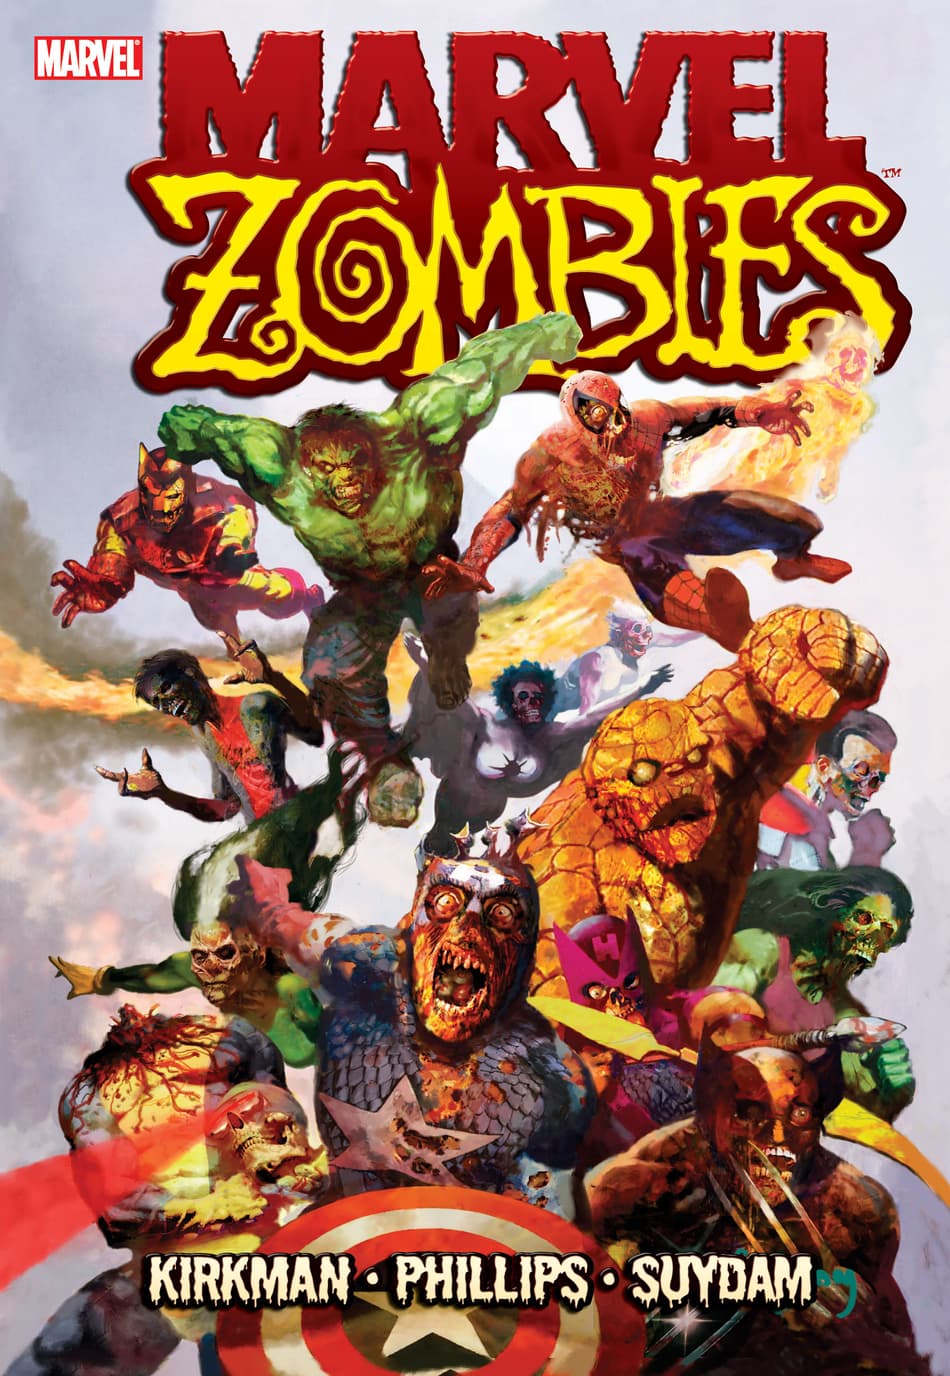 MARVEL ZOMBIES cover.